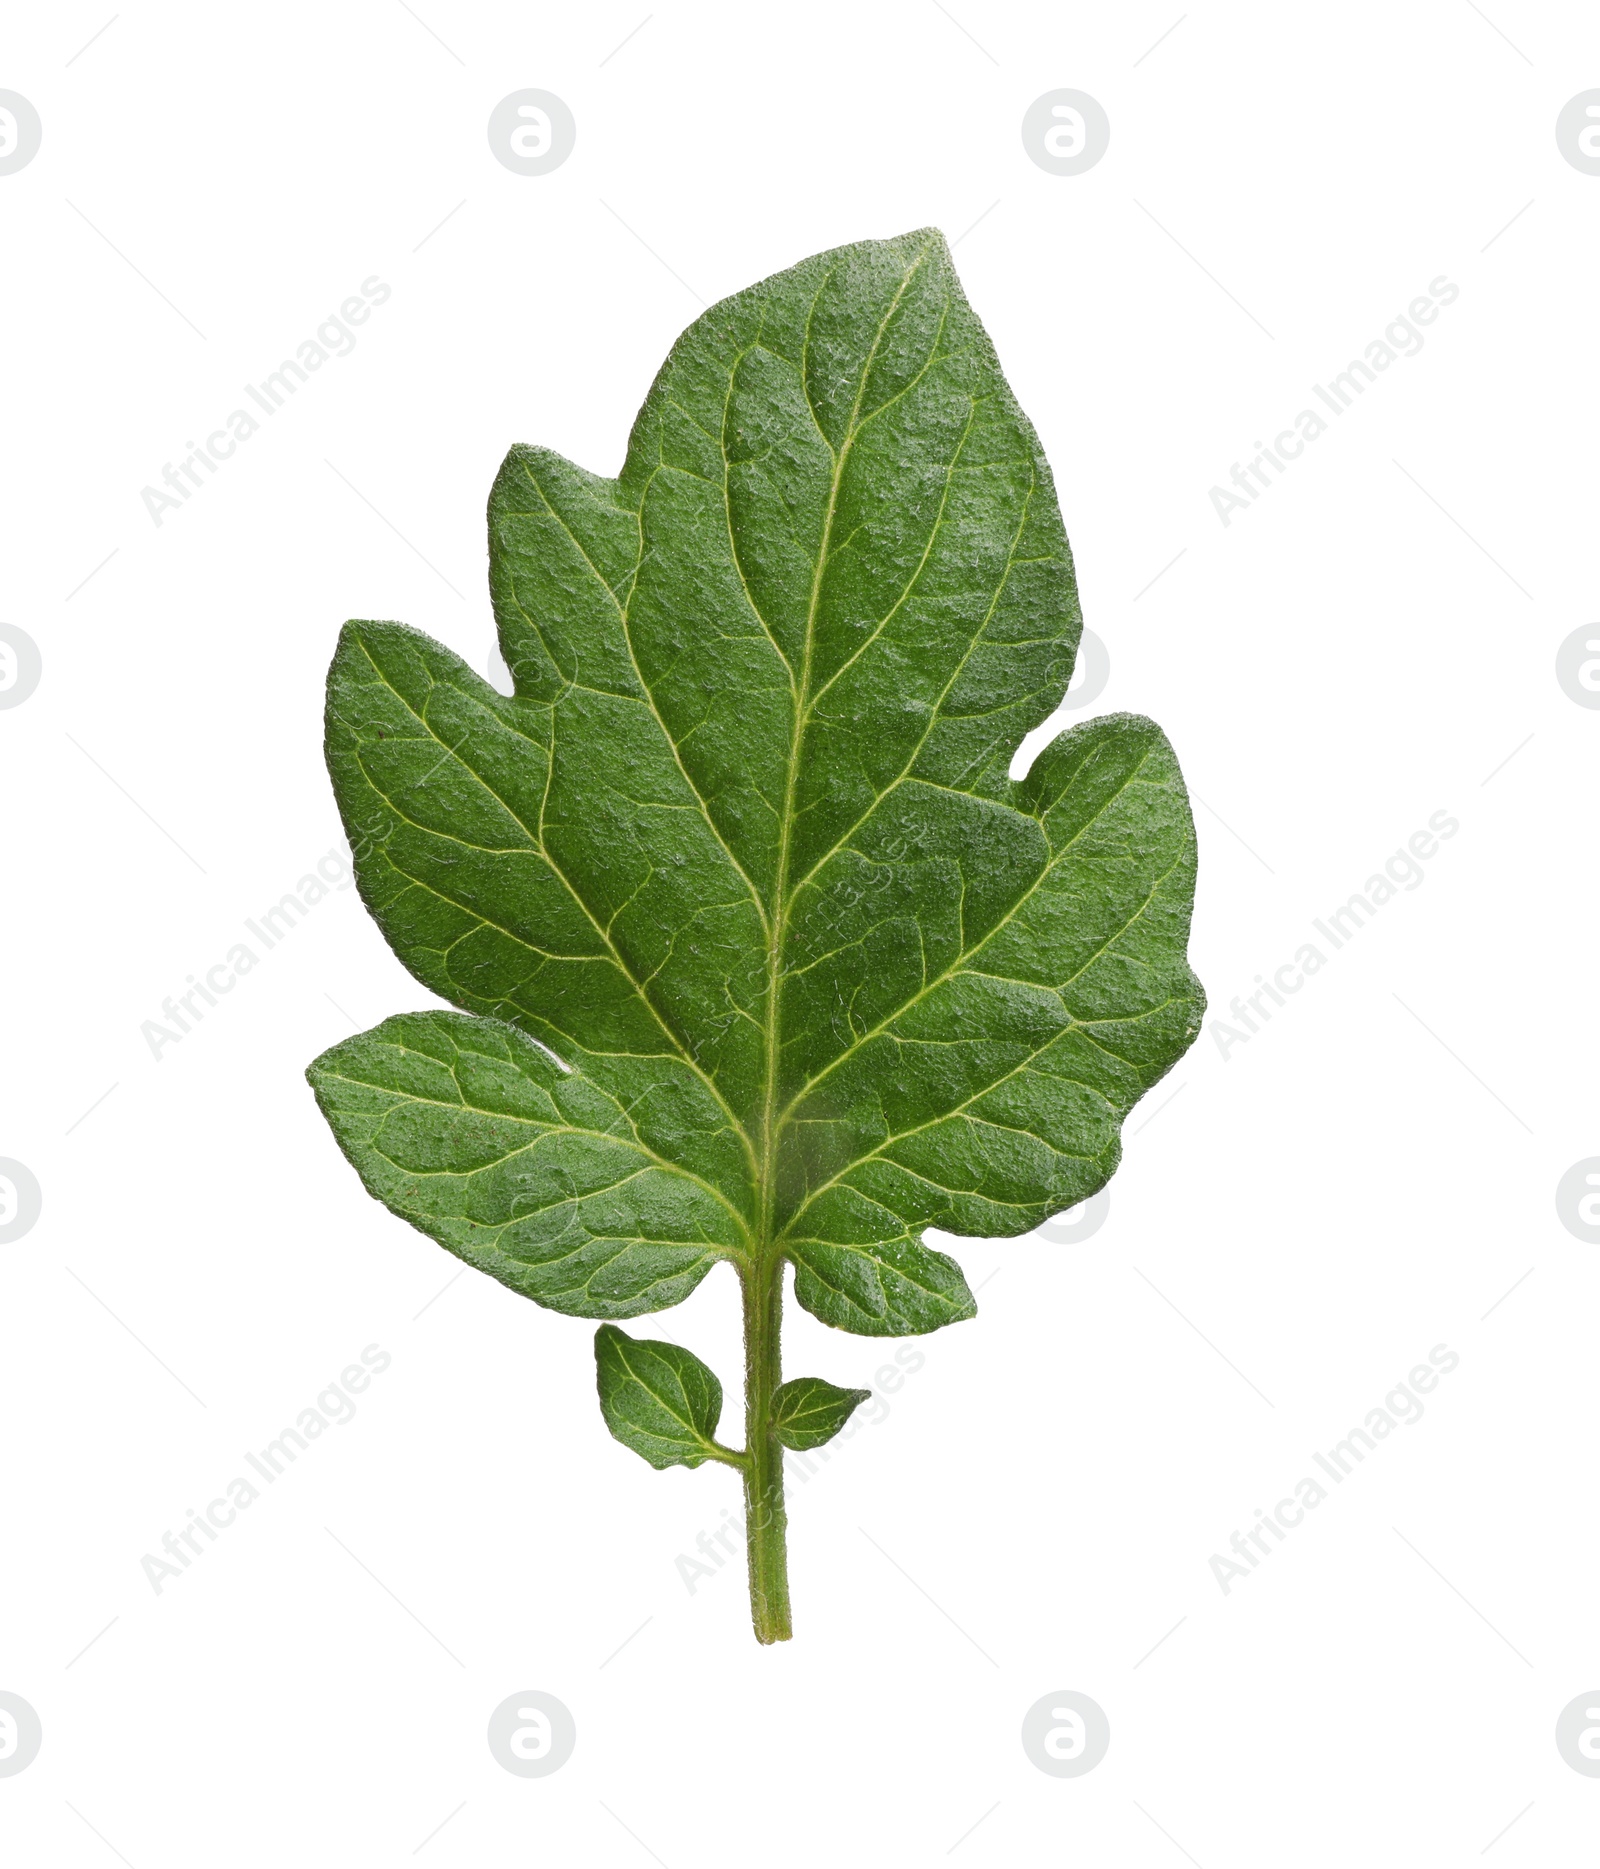 Photo of Green leaf of tomato plant isolated on white